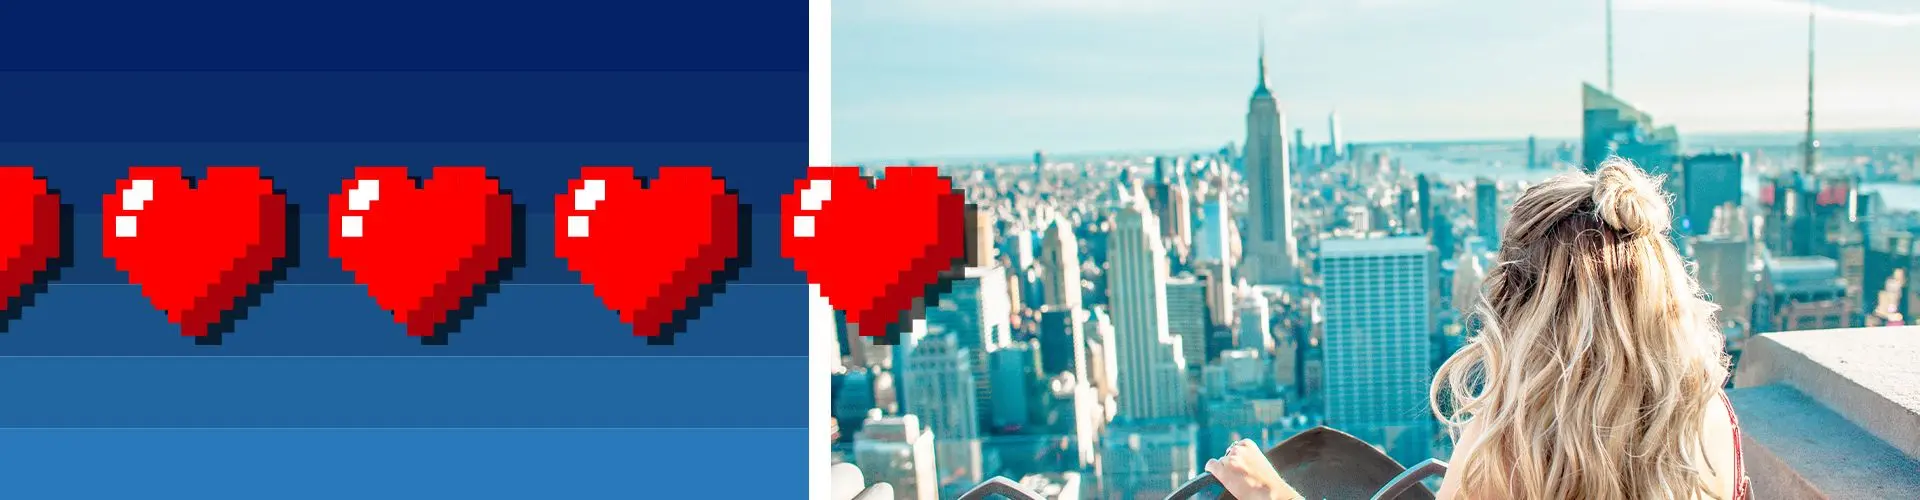 Girl looks out window on New York city on a sunny evening. Other half of image is pixel art illustration of Hearts on a blue background.